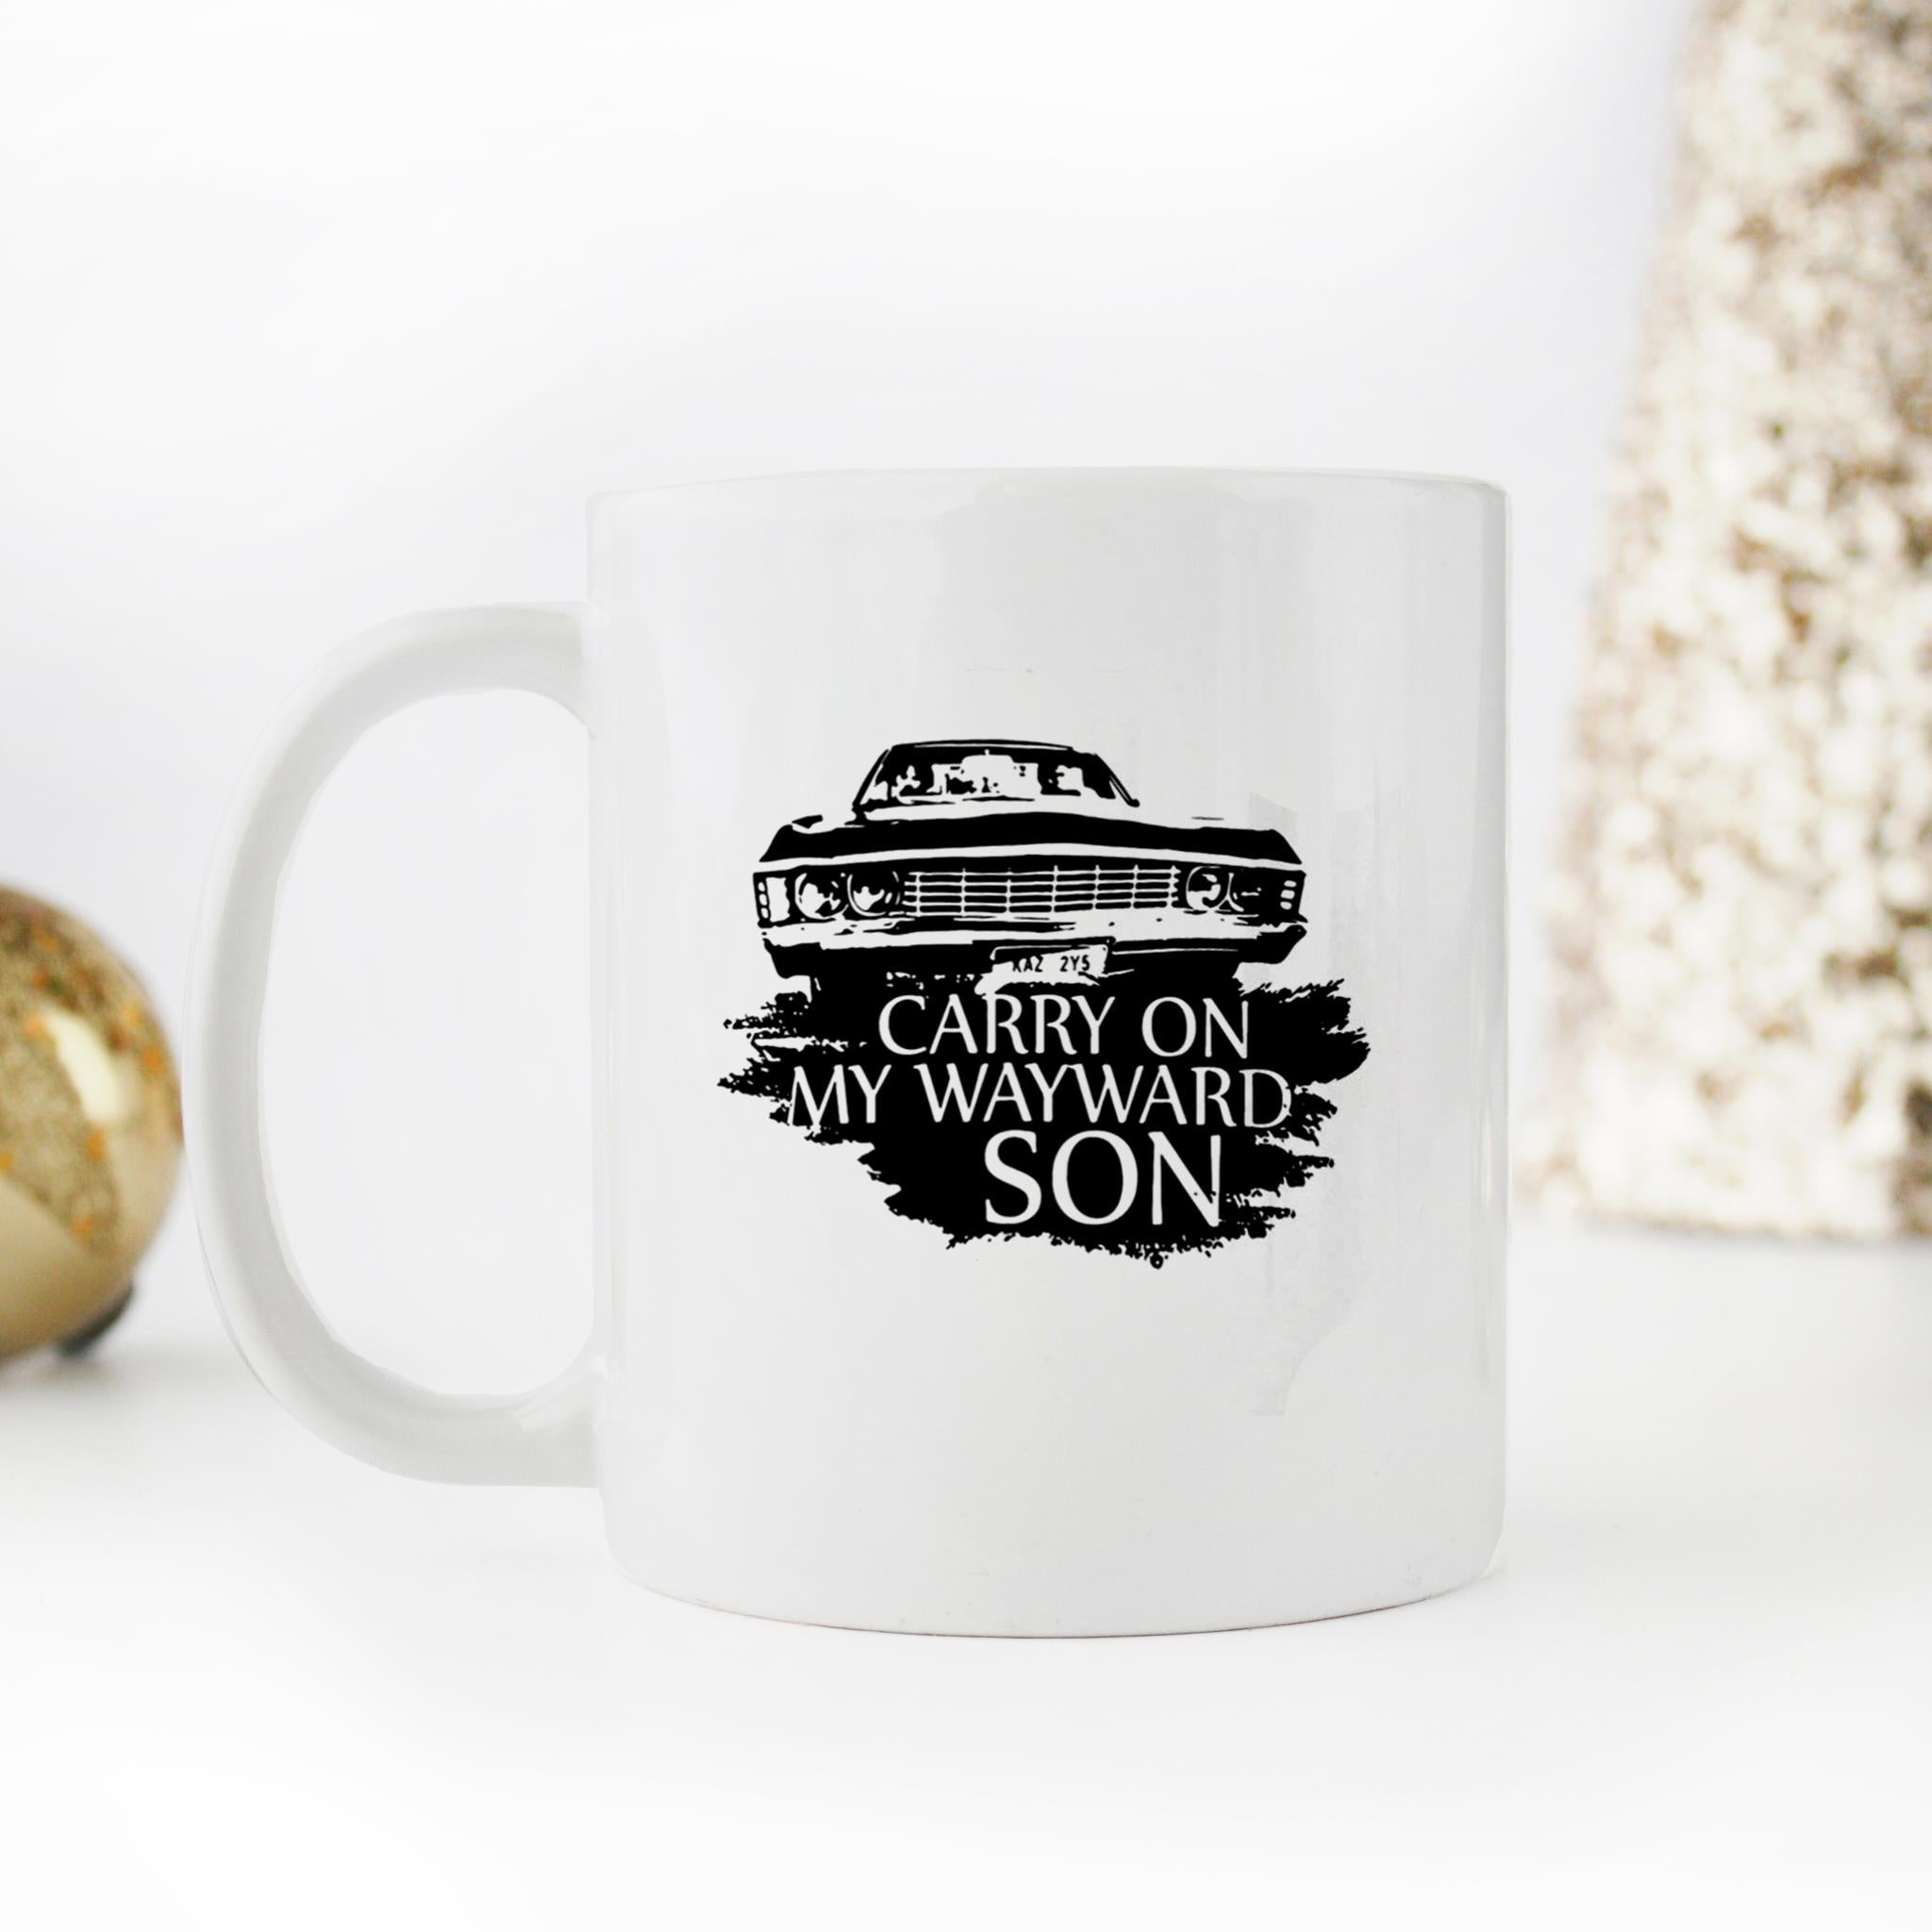 Skitongifts Funny Ceramic Novelty Coffee Mug Carry On My Wayward Son Perfect For Fan Of Sam And Dean ifvNZh5